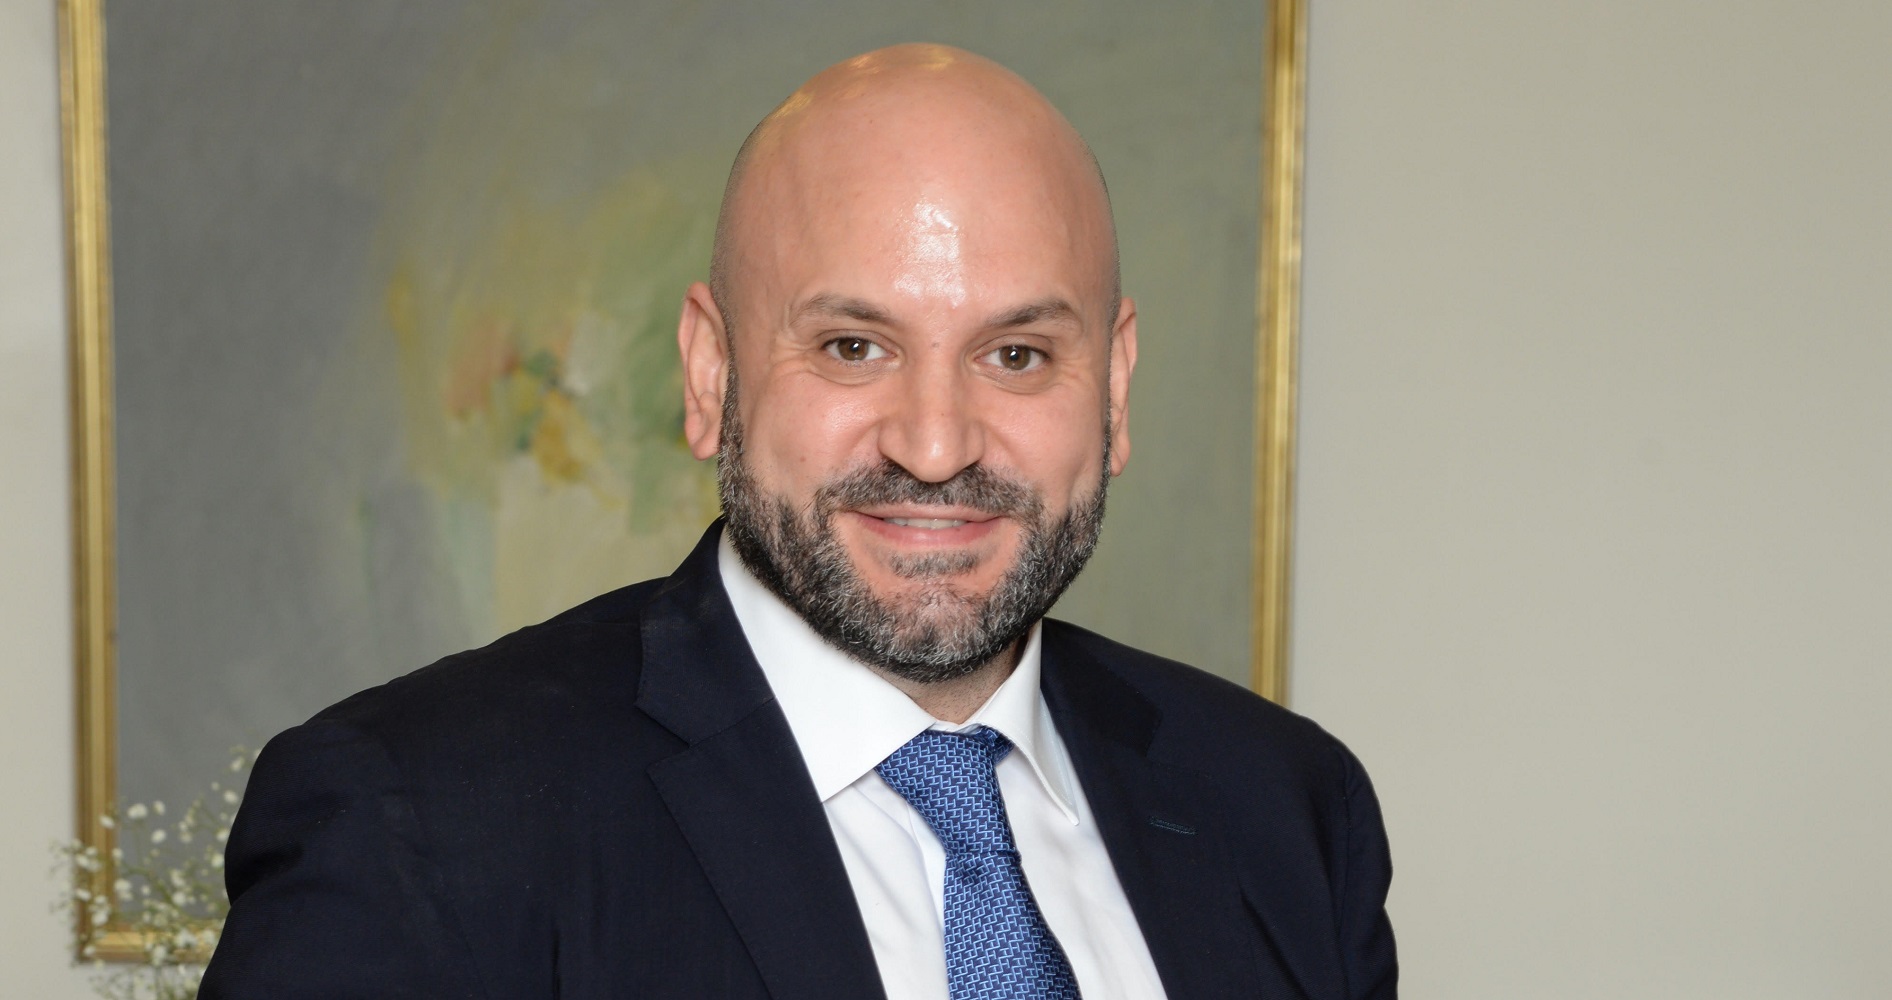 Hussein M. Dajani Leaves Nissan Motor Co. for a Partner Role with Deloitte Digital in the Middle East